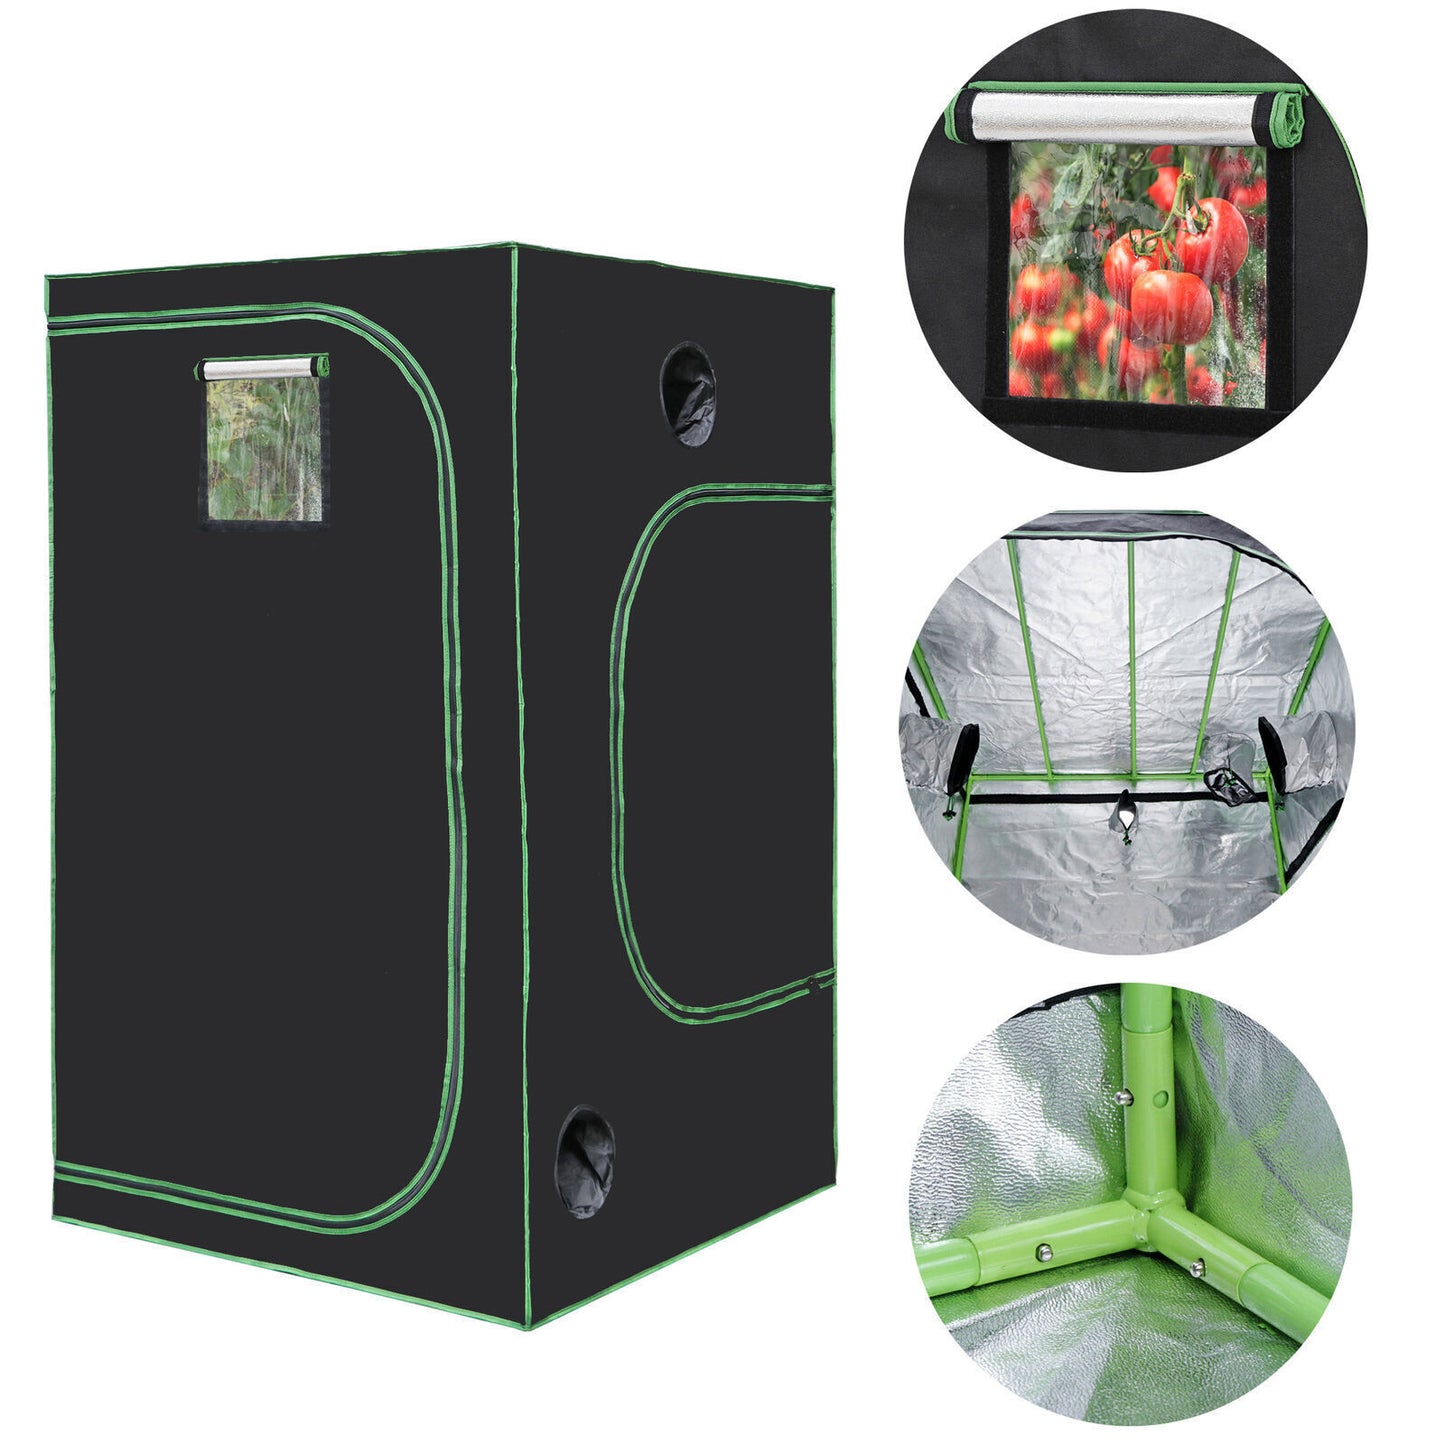 48"x48"x80" Grow Tent Box Seed Room Hydroponic with Window and Floor Tray Indoor